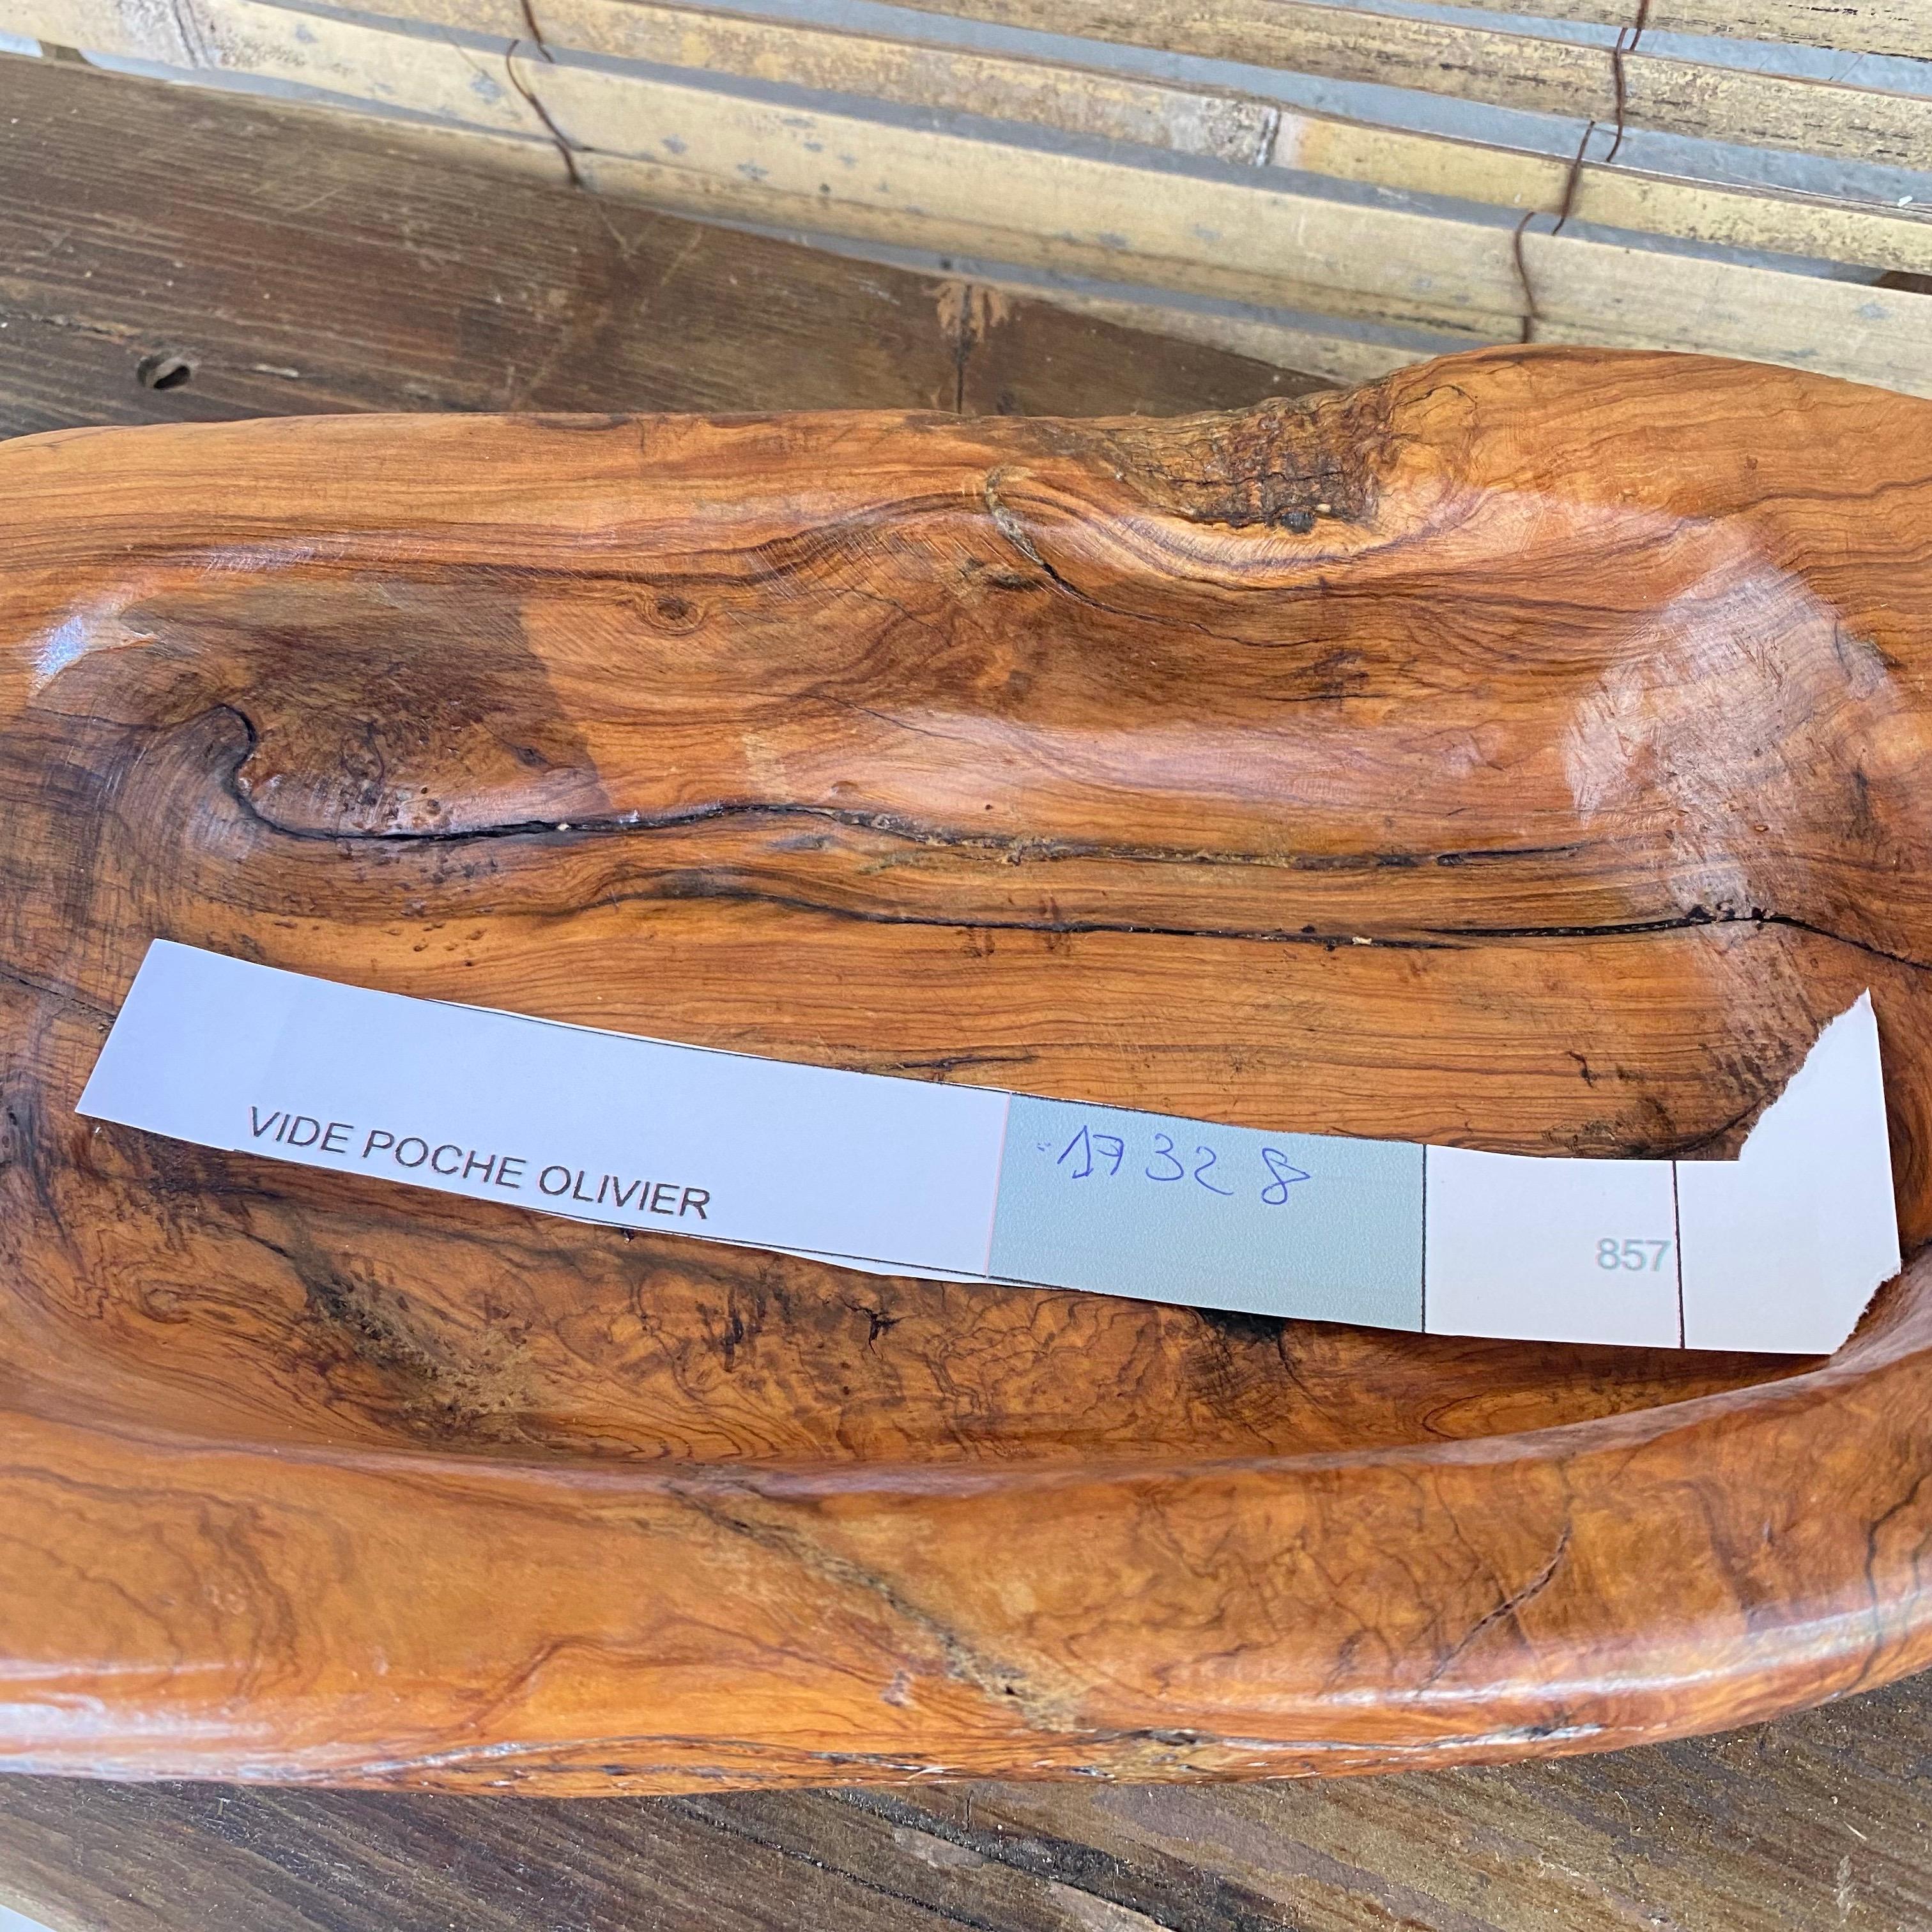 This item is in Olive wood. It has been made in France circa 19510. It can be used as a vide poche or a decorative bowl. It is in the style of Alexandre noll.